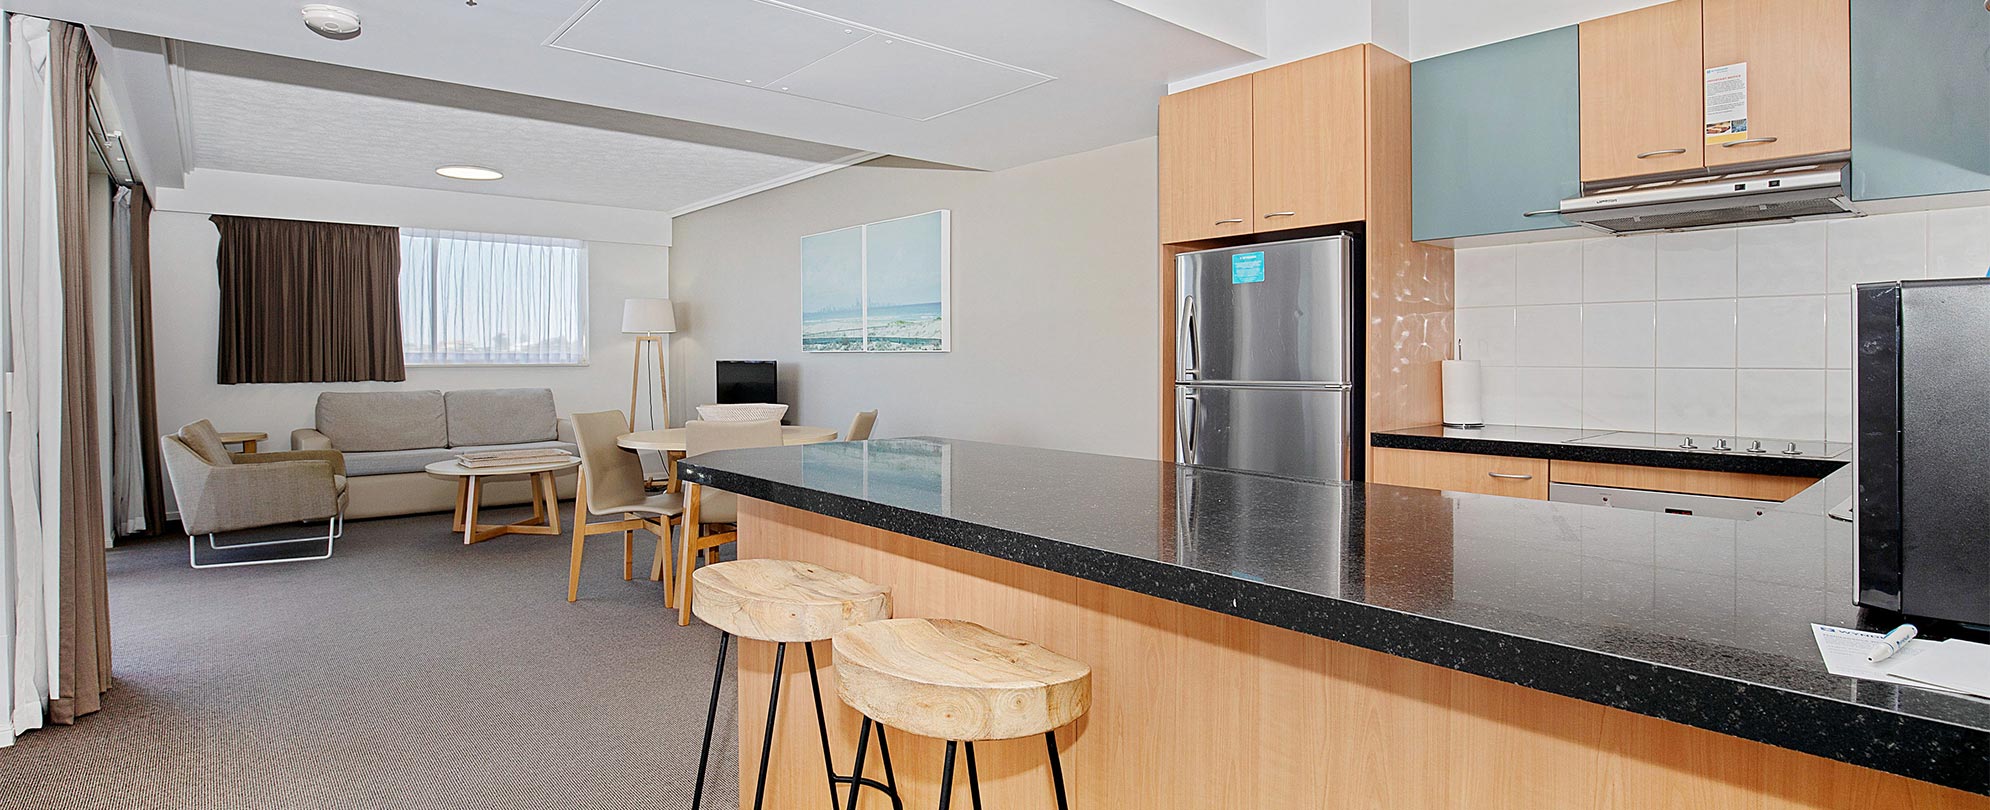 The countertop bar with 2 stools in the kitchen of a Club Wyndham Kirra Beach standard suite.